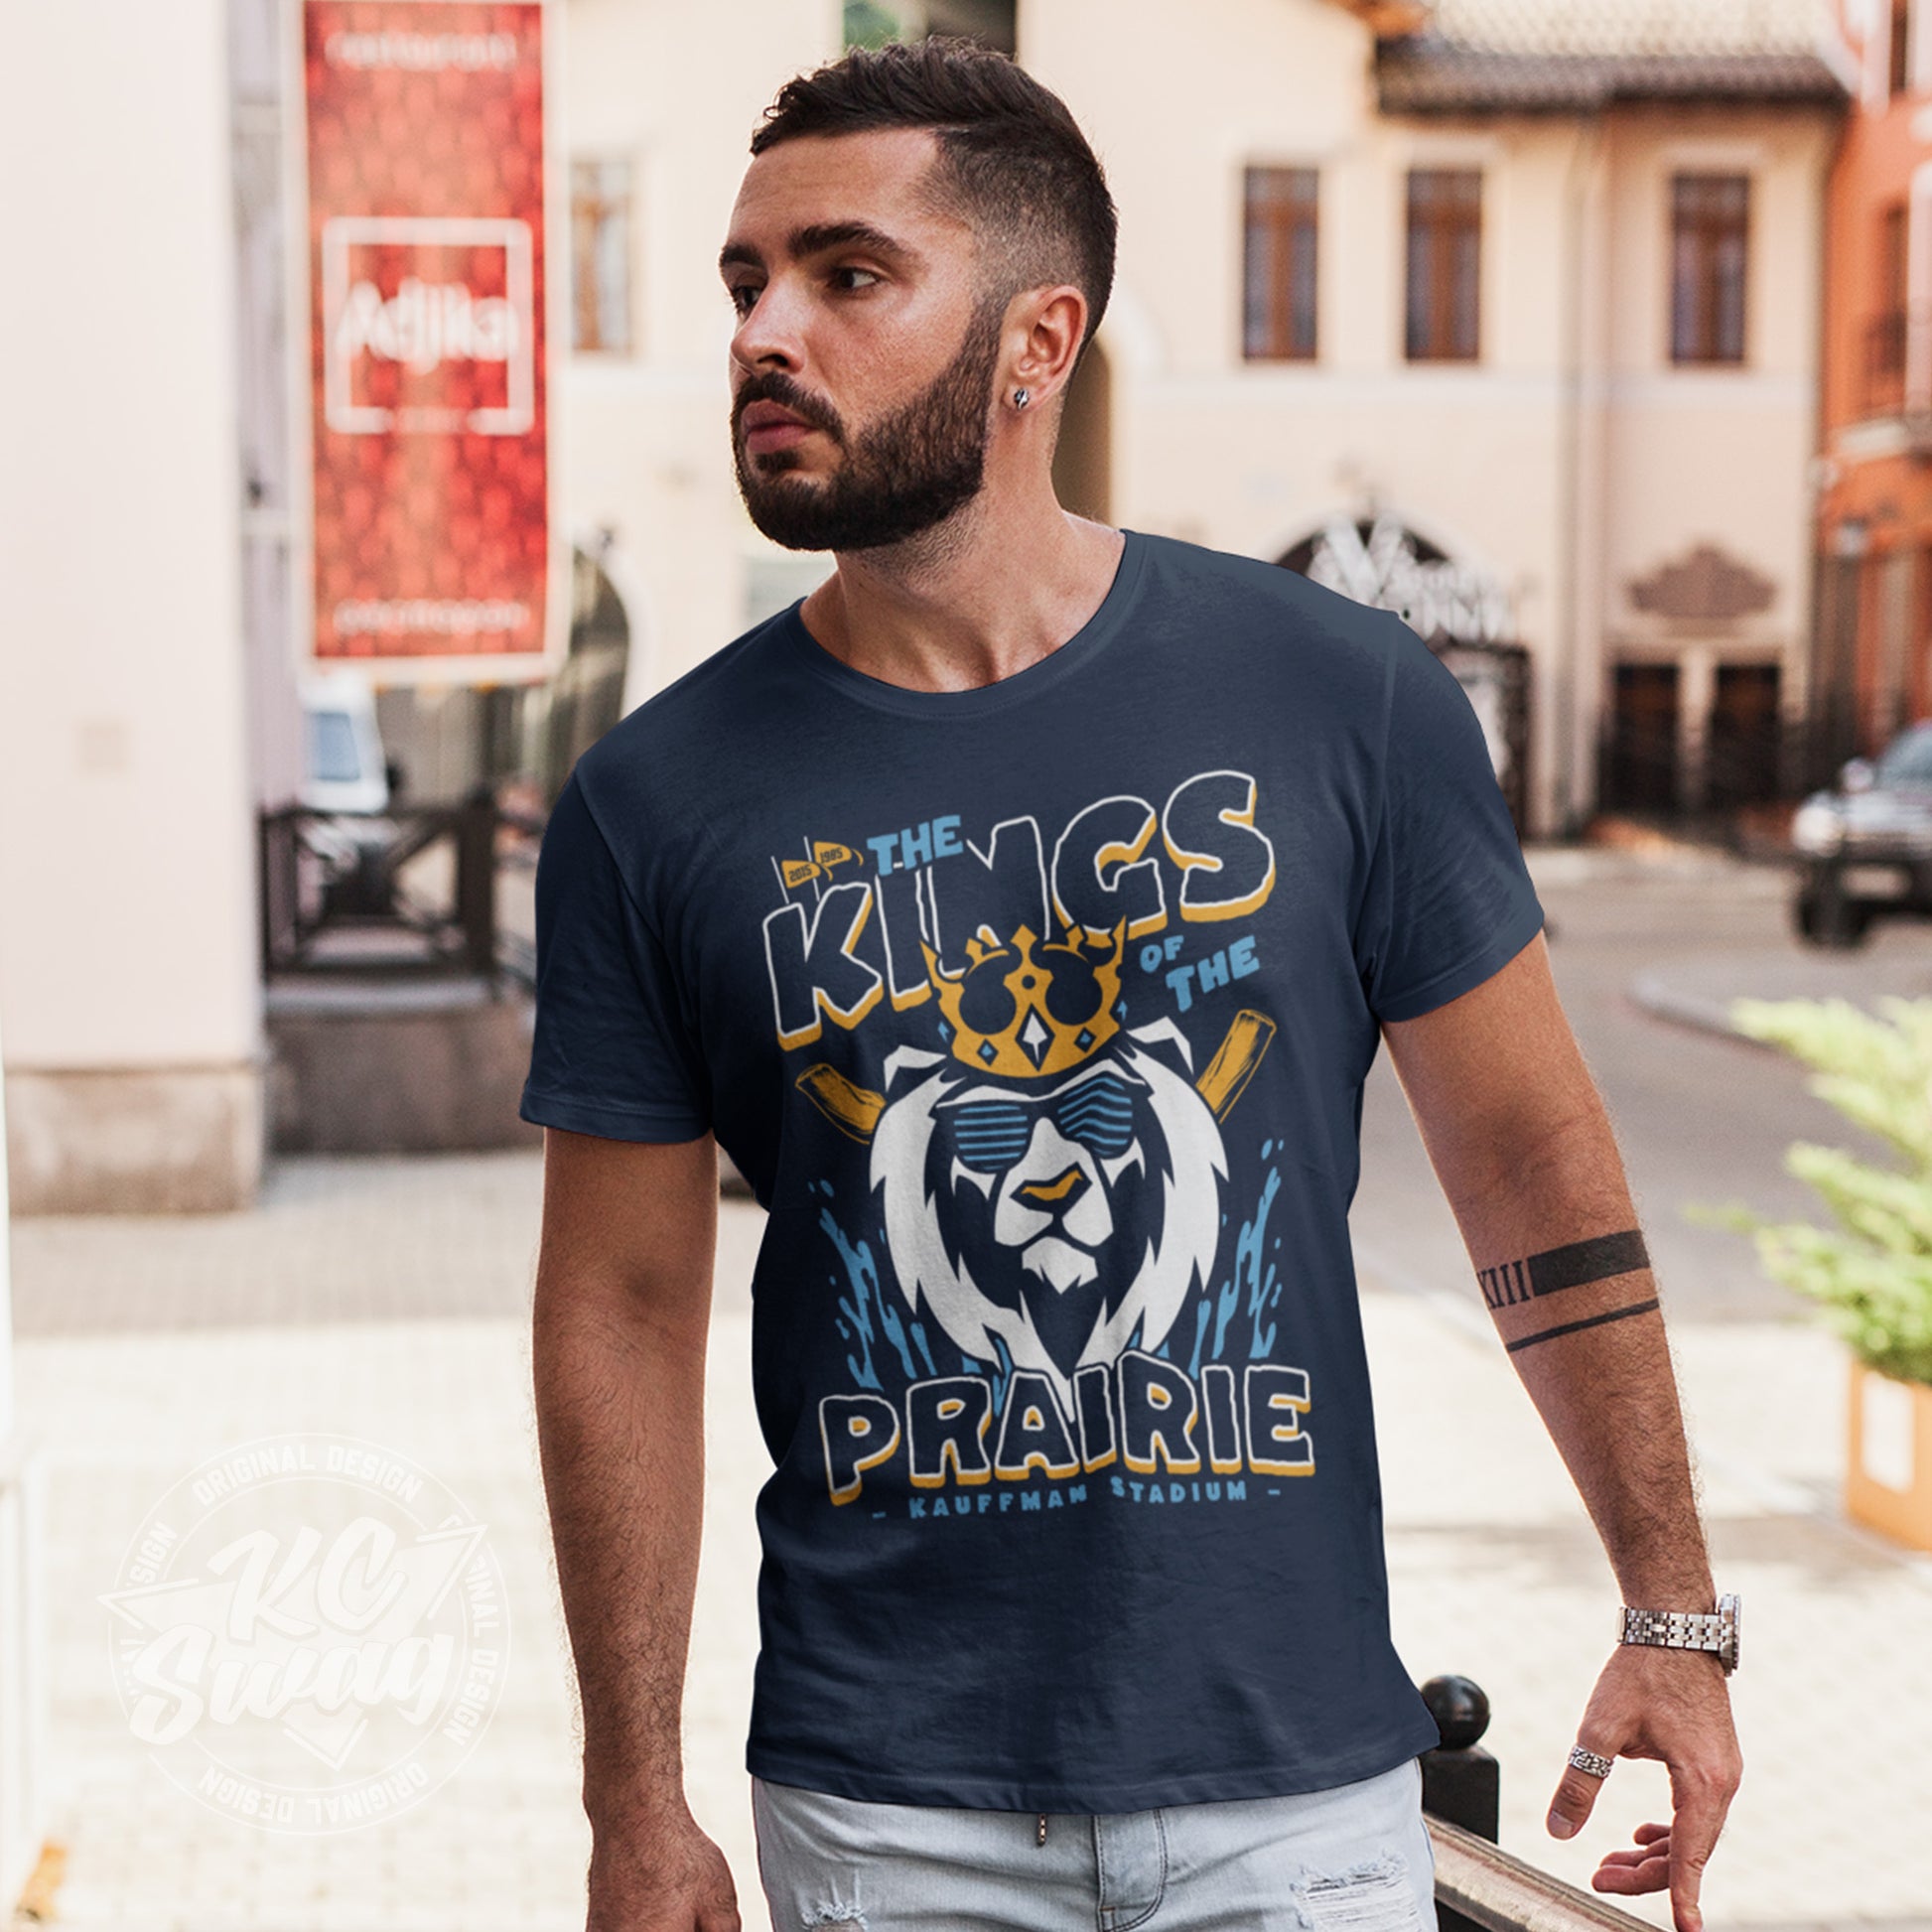 KC Swag - Kansas City Royals, Kings Of The Prairie design on navy blue unisex t-shirt worn by male model walking through an open-air plaza